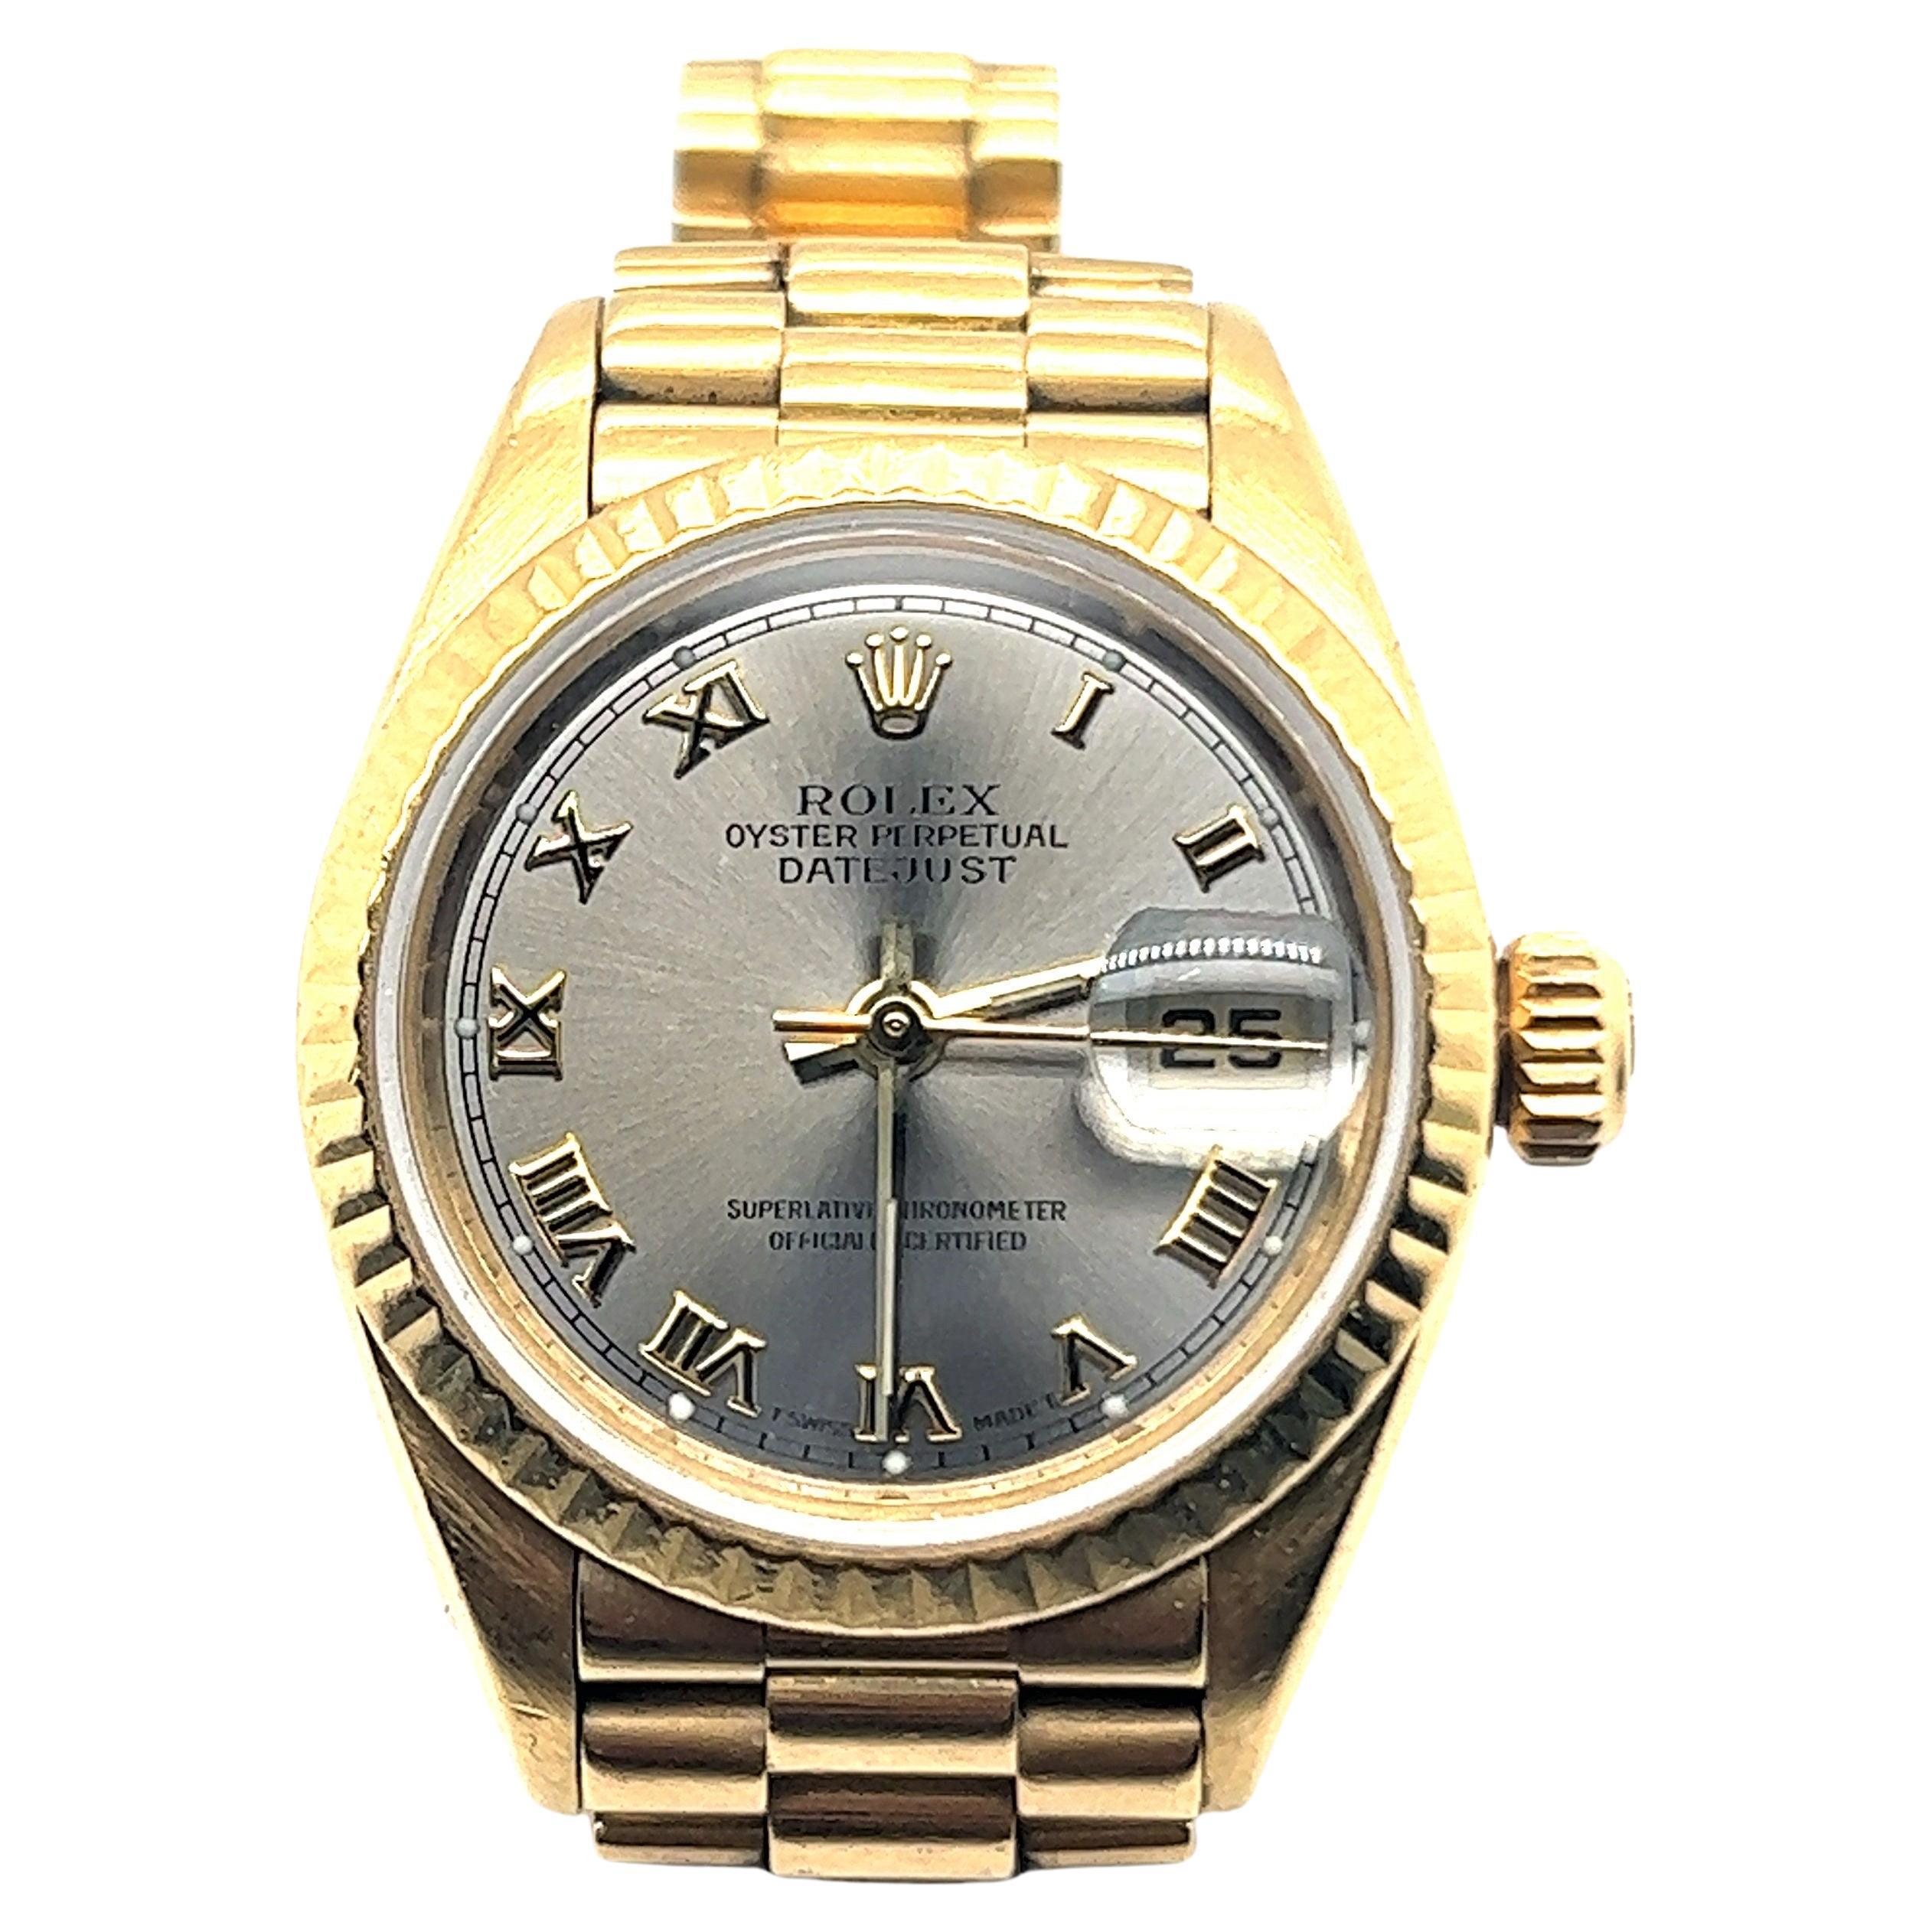 Rolex, Oyster Perpetual Datejust, Automatic, 750/18k Yellow Gold, Ref. 8570